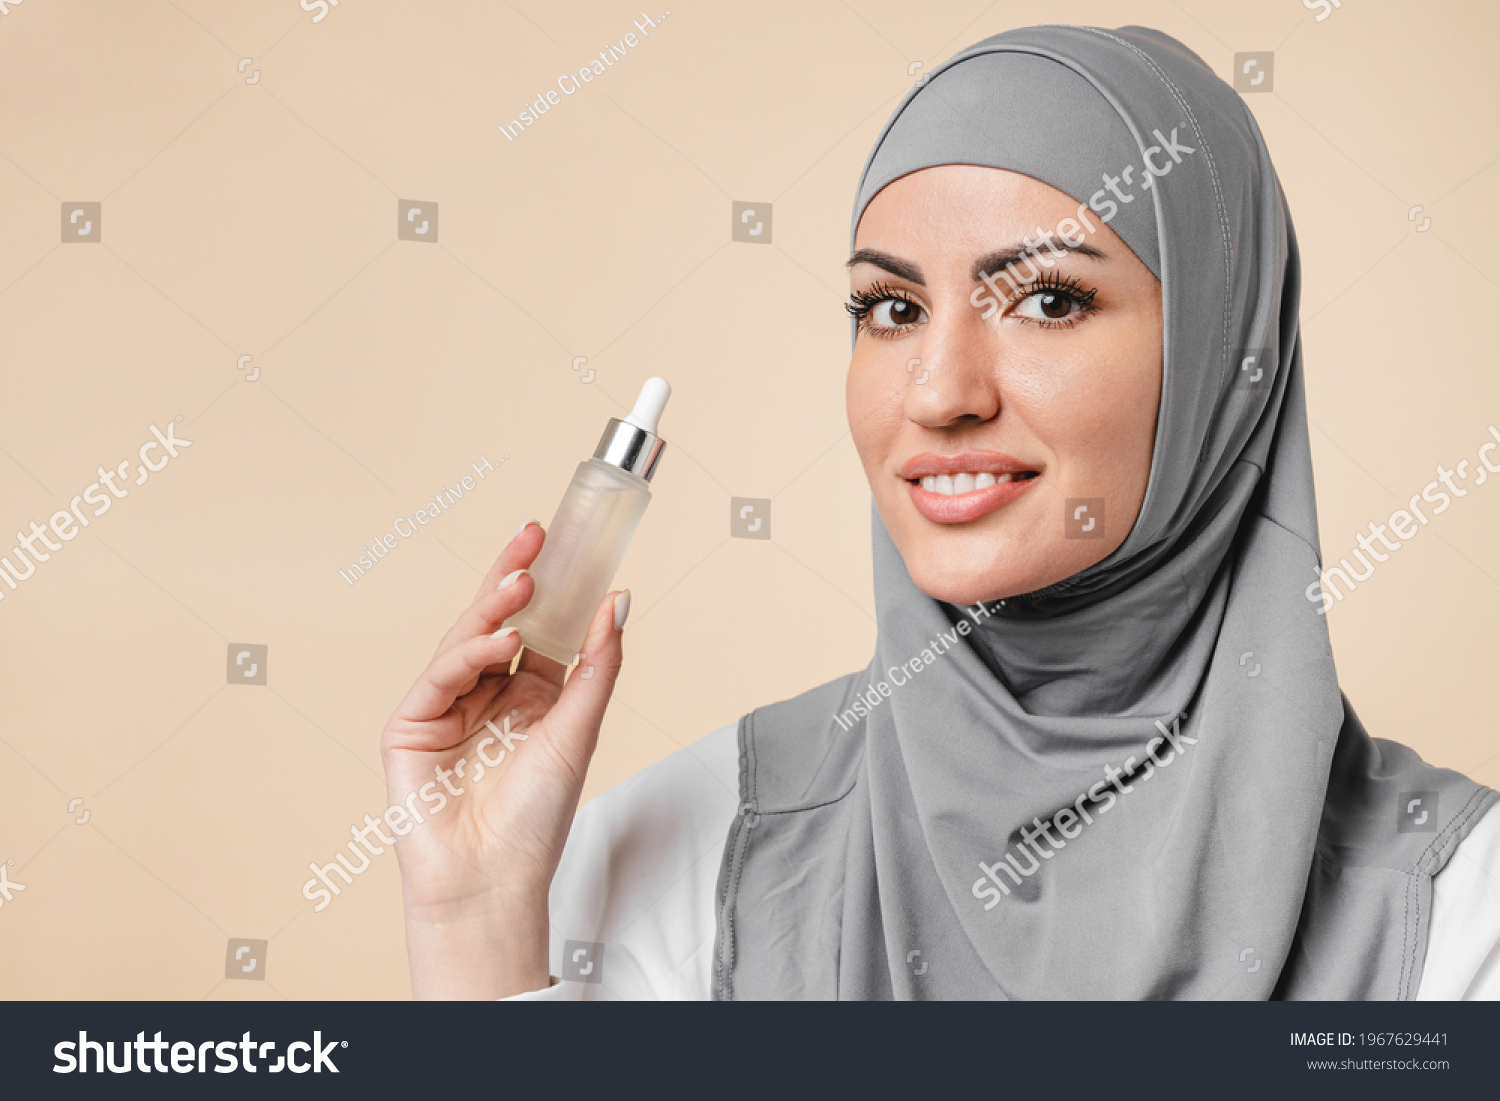 Young pretty arabian muslim islamic woman in hijab using beauty serum for anti-age effect, rejuvenation and pampering. Soft skin, makeup base and cosmetics concept #1967629441